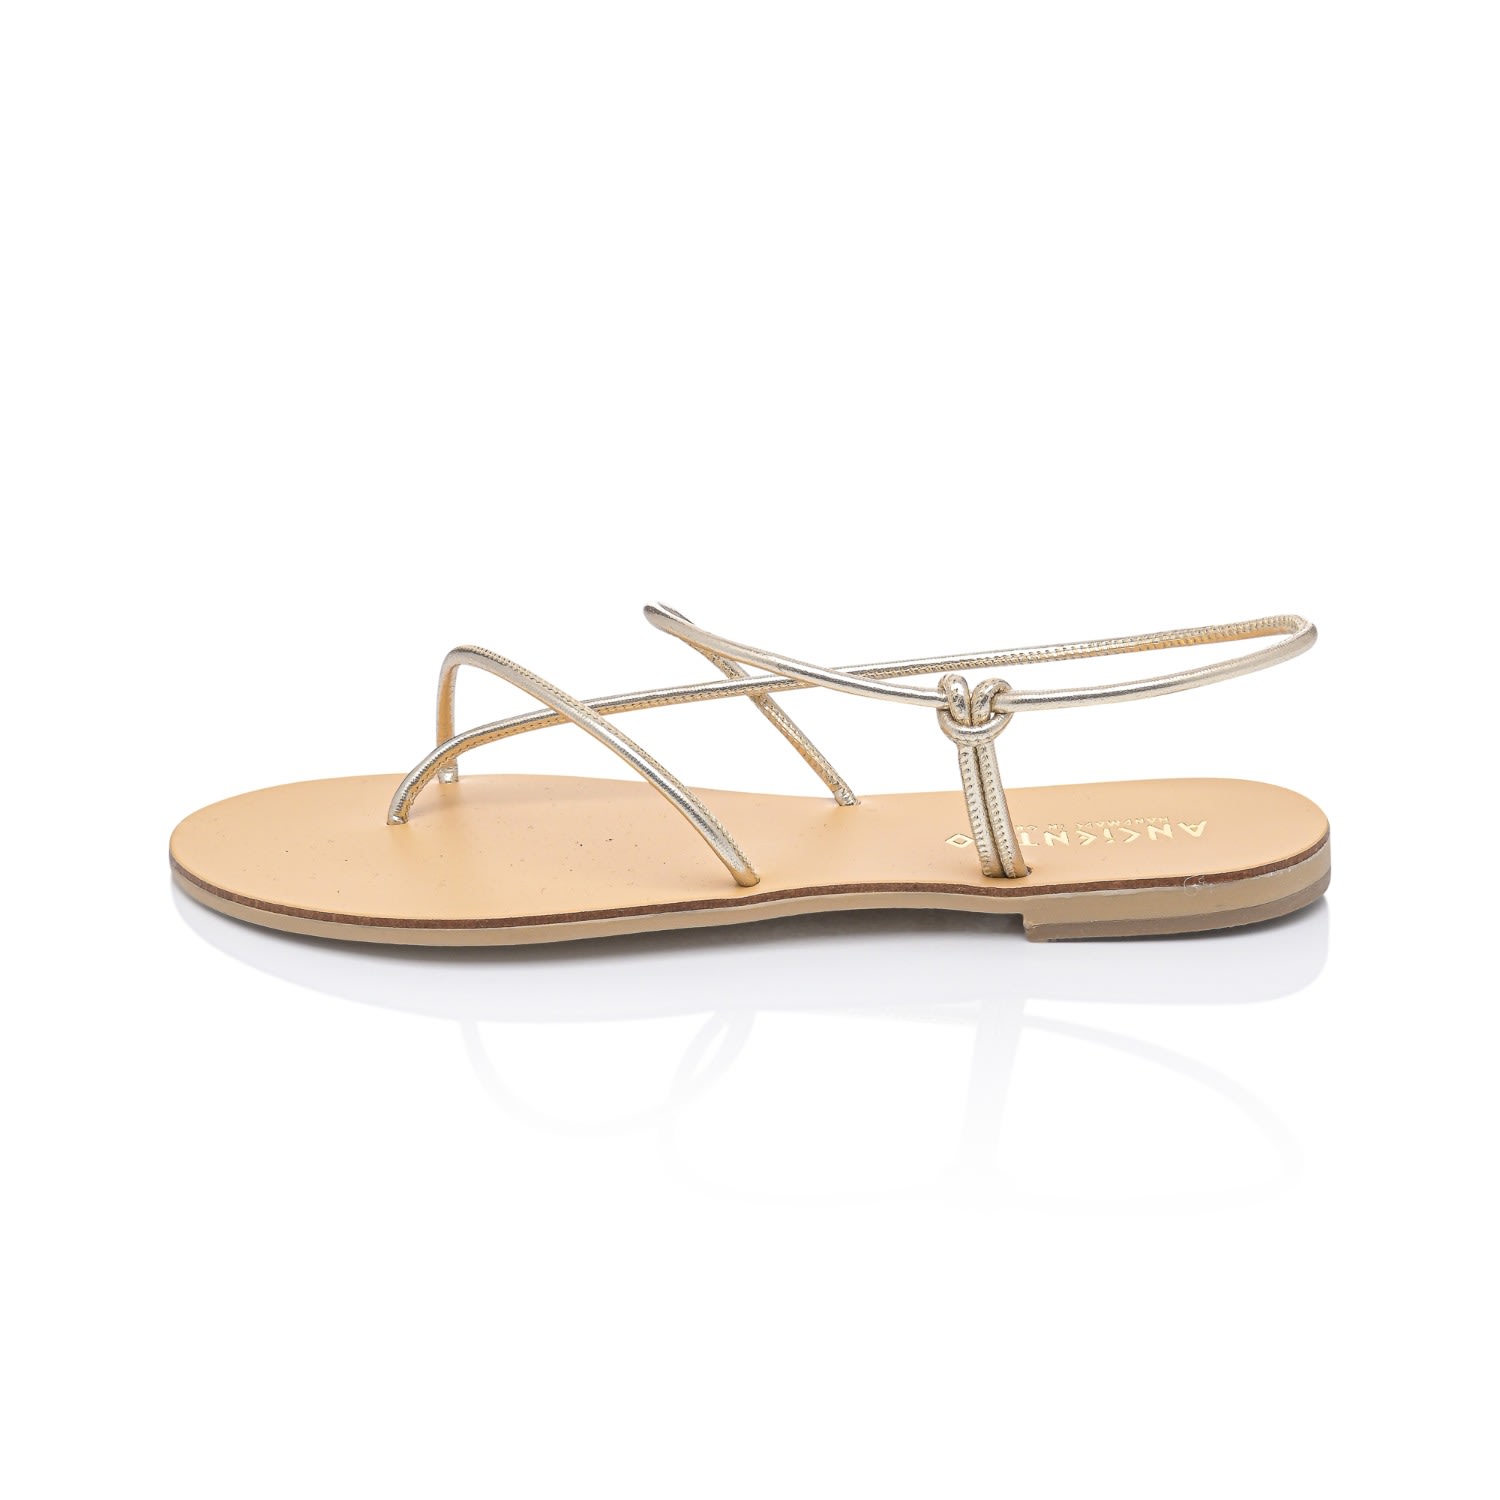 Ancientoo Iaso Cord Gold Handcrafted Women's Leather Sandals With A Lasso Style Strap